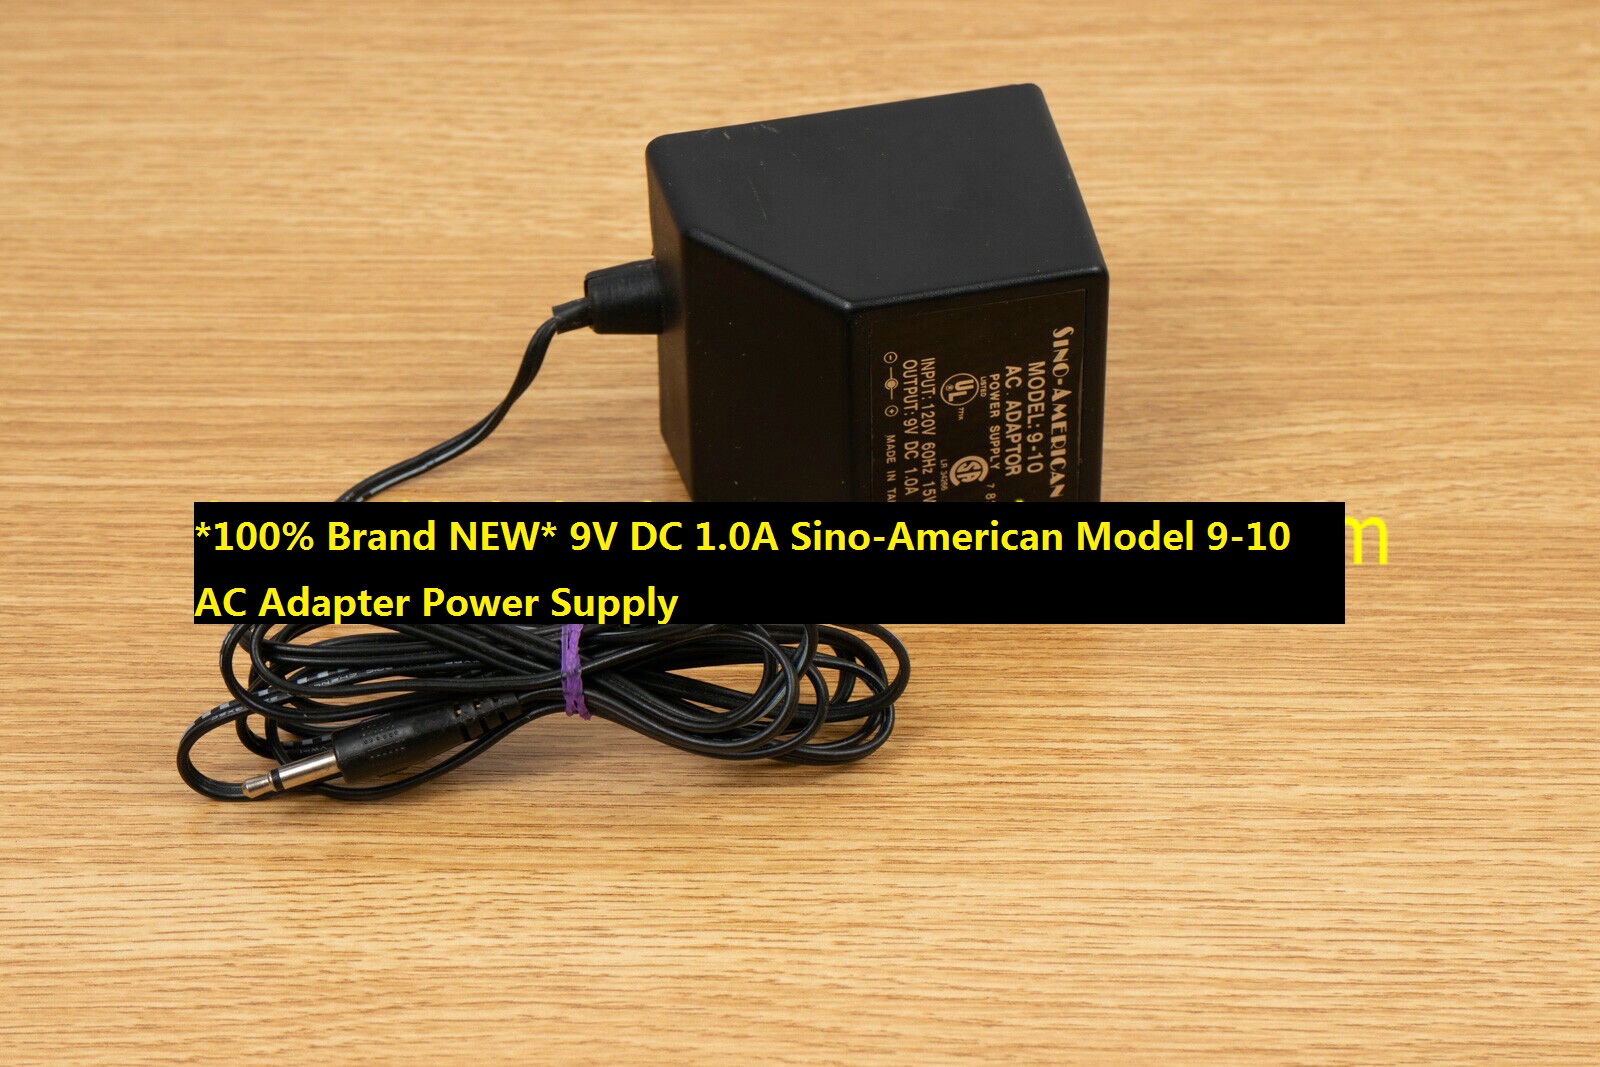 *100% Brand NEW* 9V DC 1.0A Sino-American Model 9-10 AC Adapter Power Supply - Click Image to Close